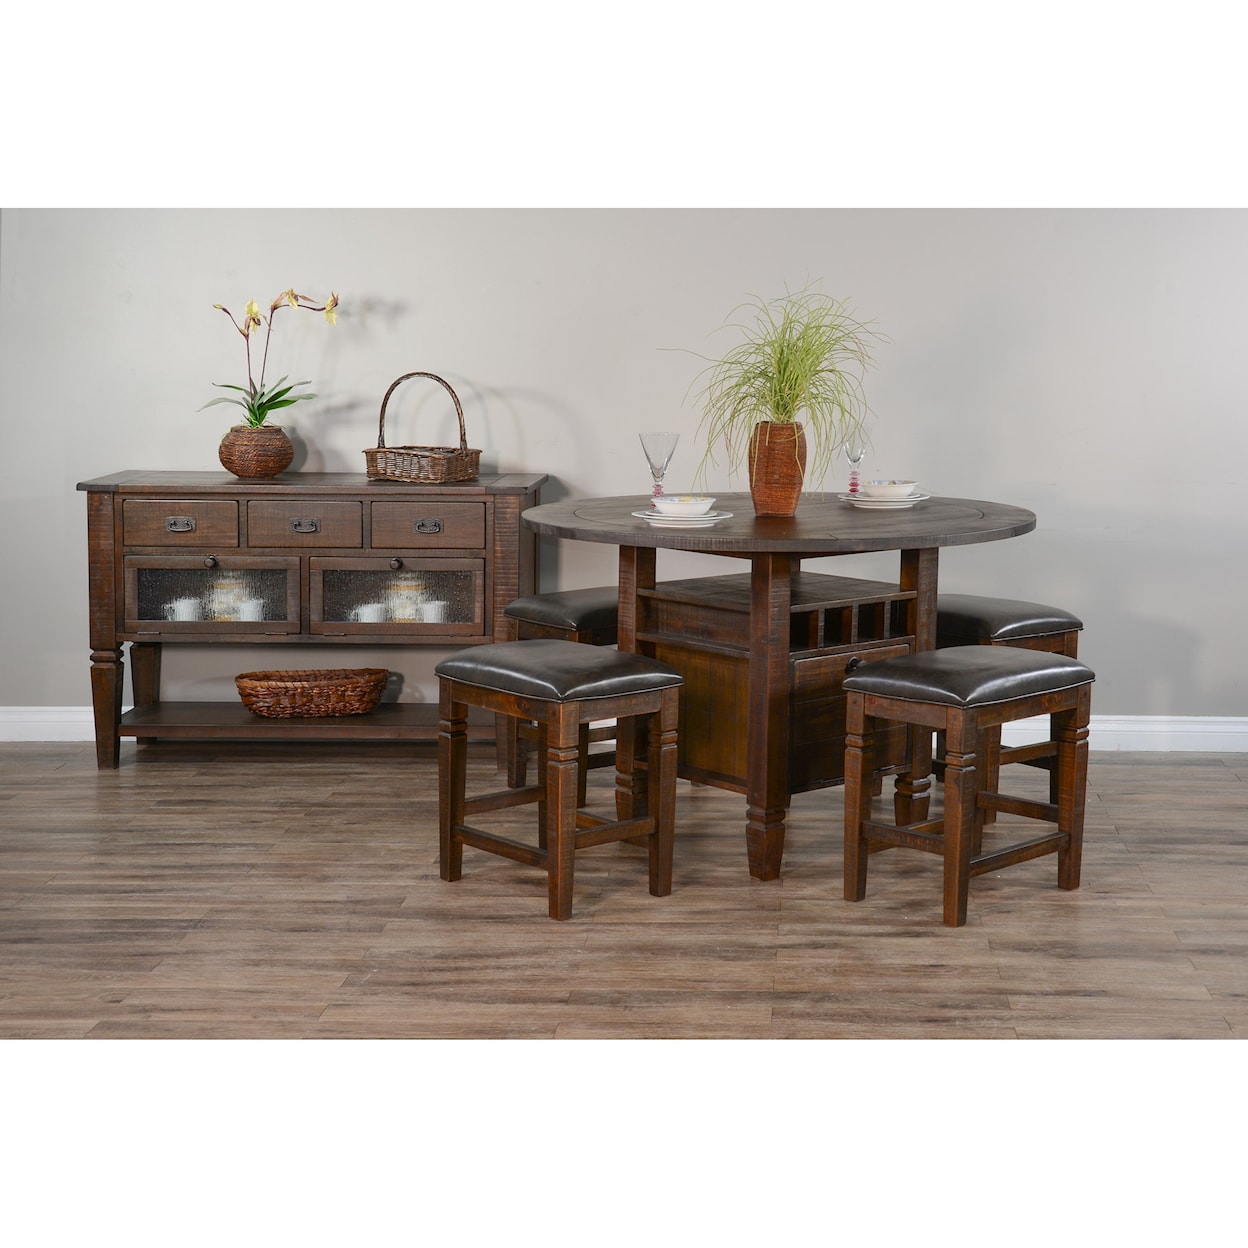 Sunny Designs Homestead Dining Room Group